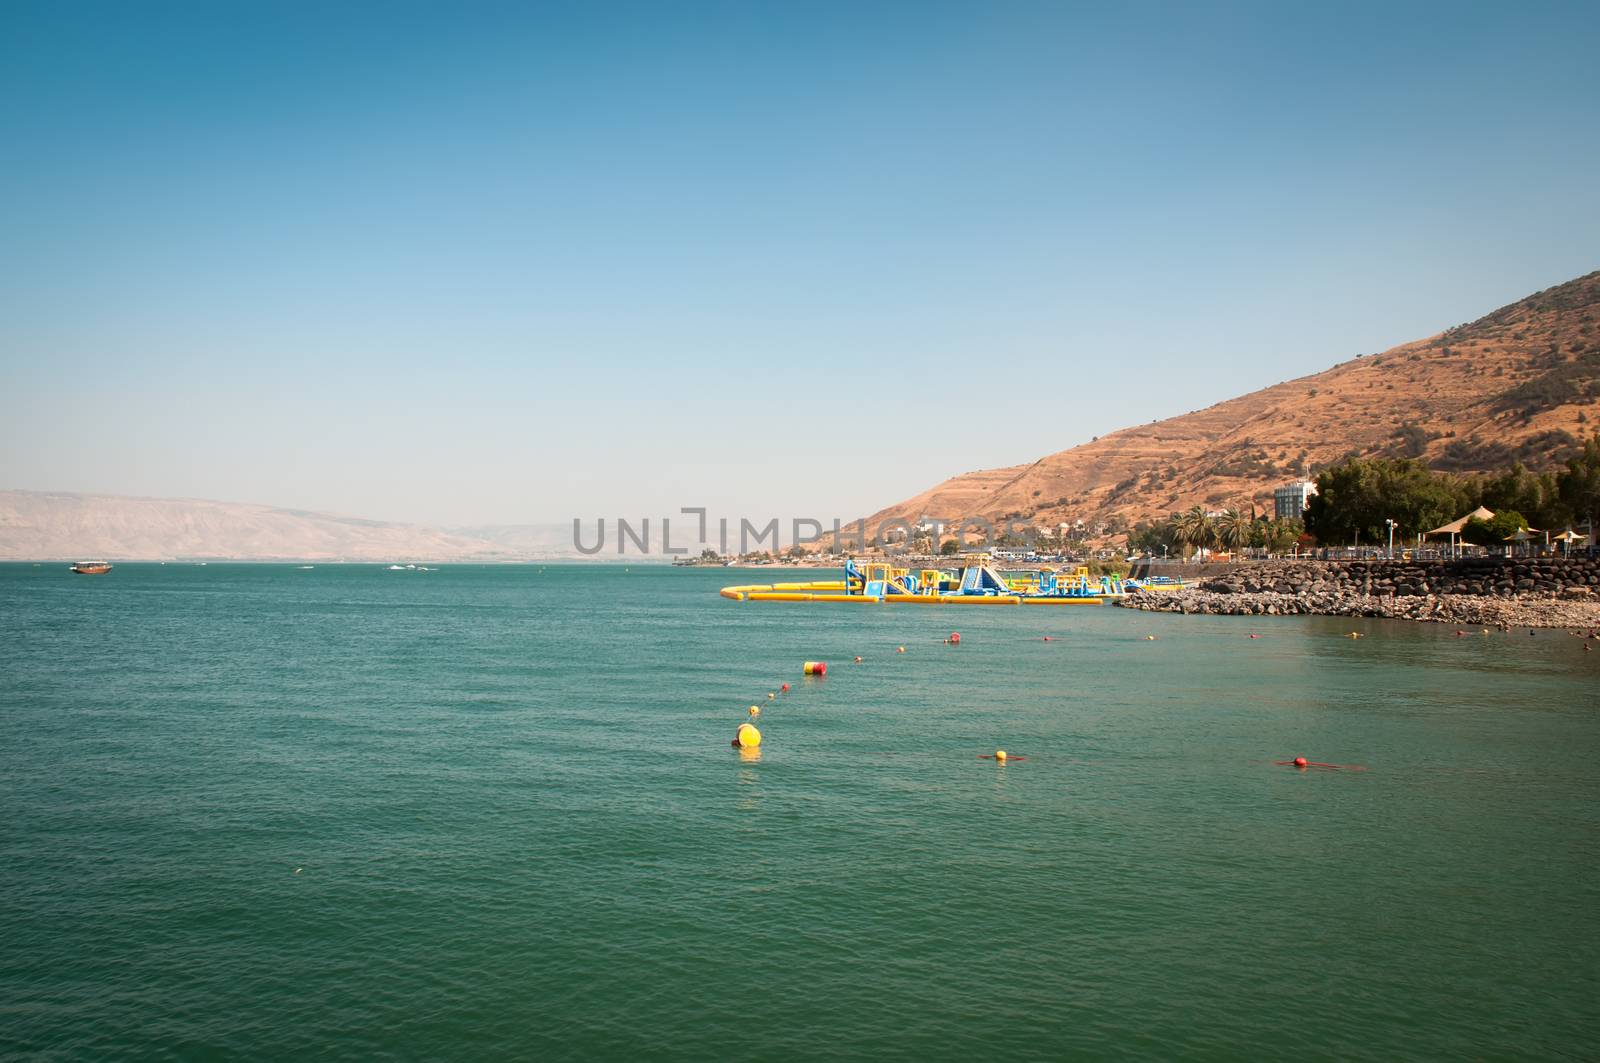 Lake of the sea of Galilee and the beach. Israel . by LarisaP